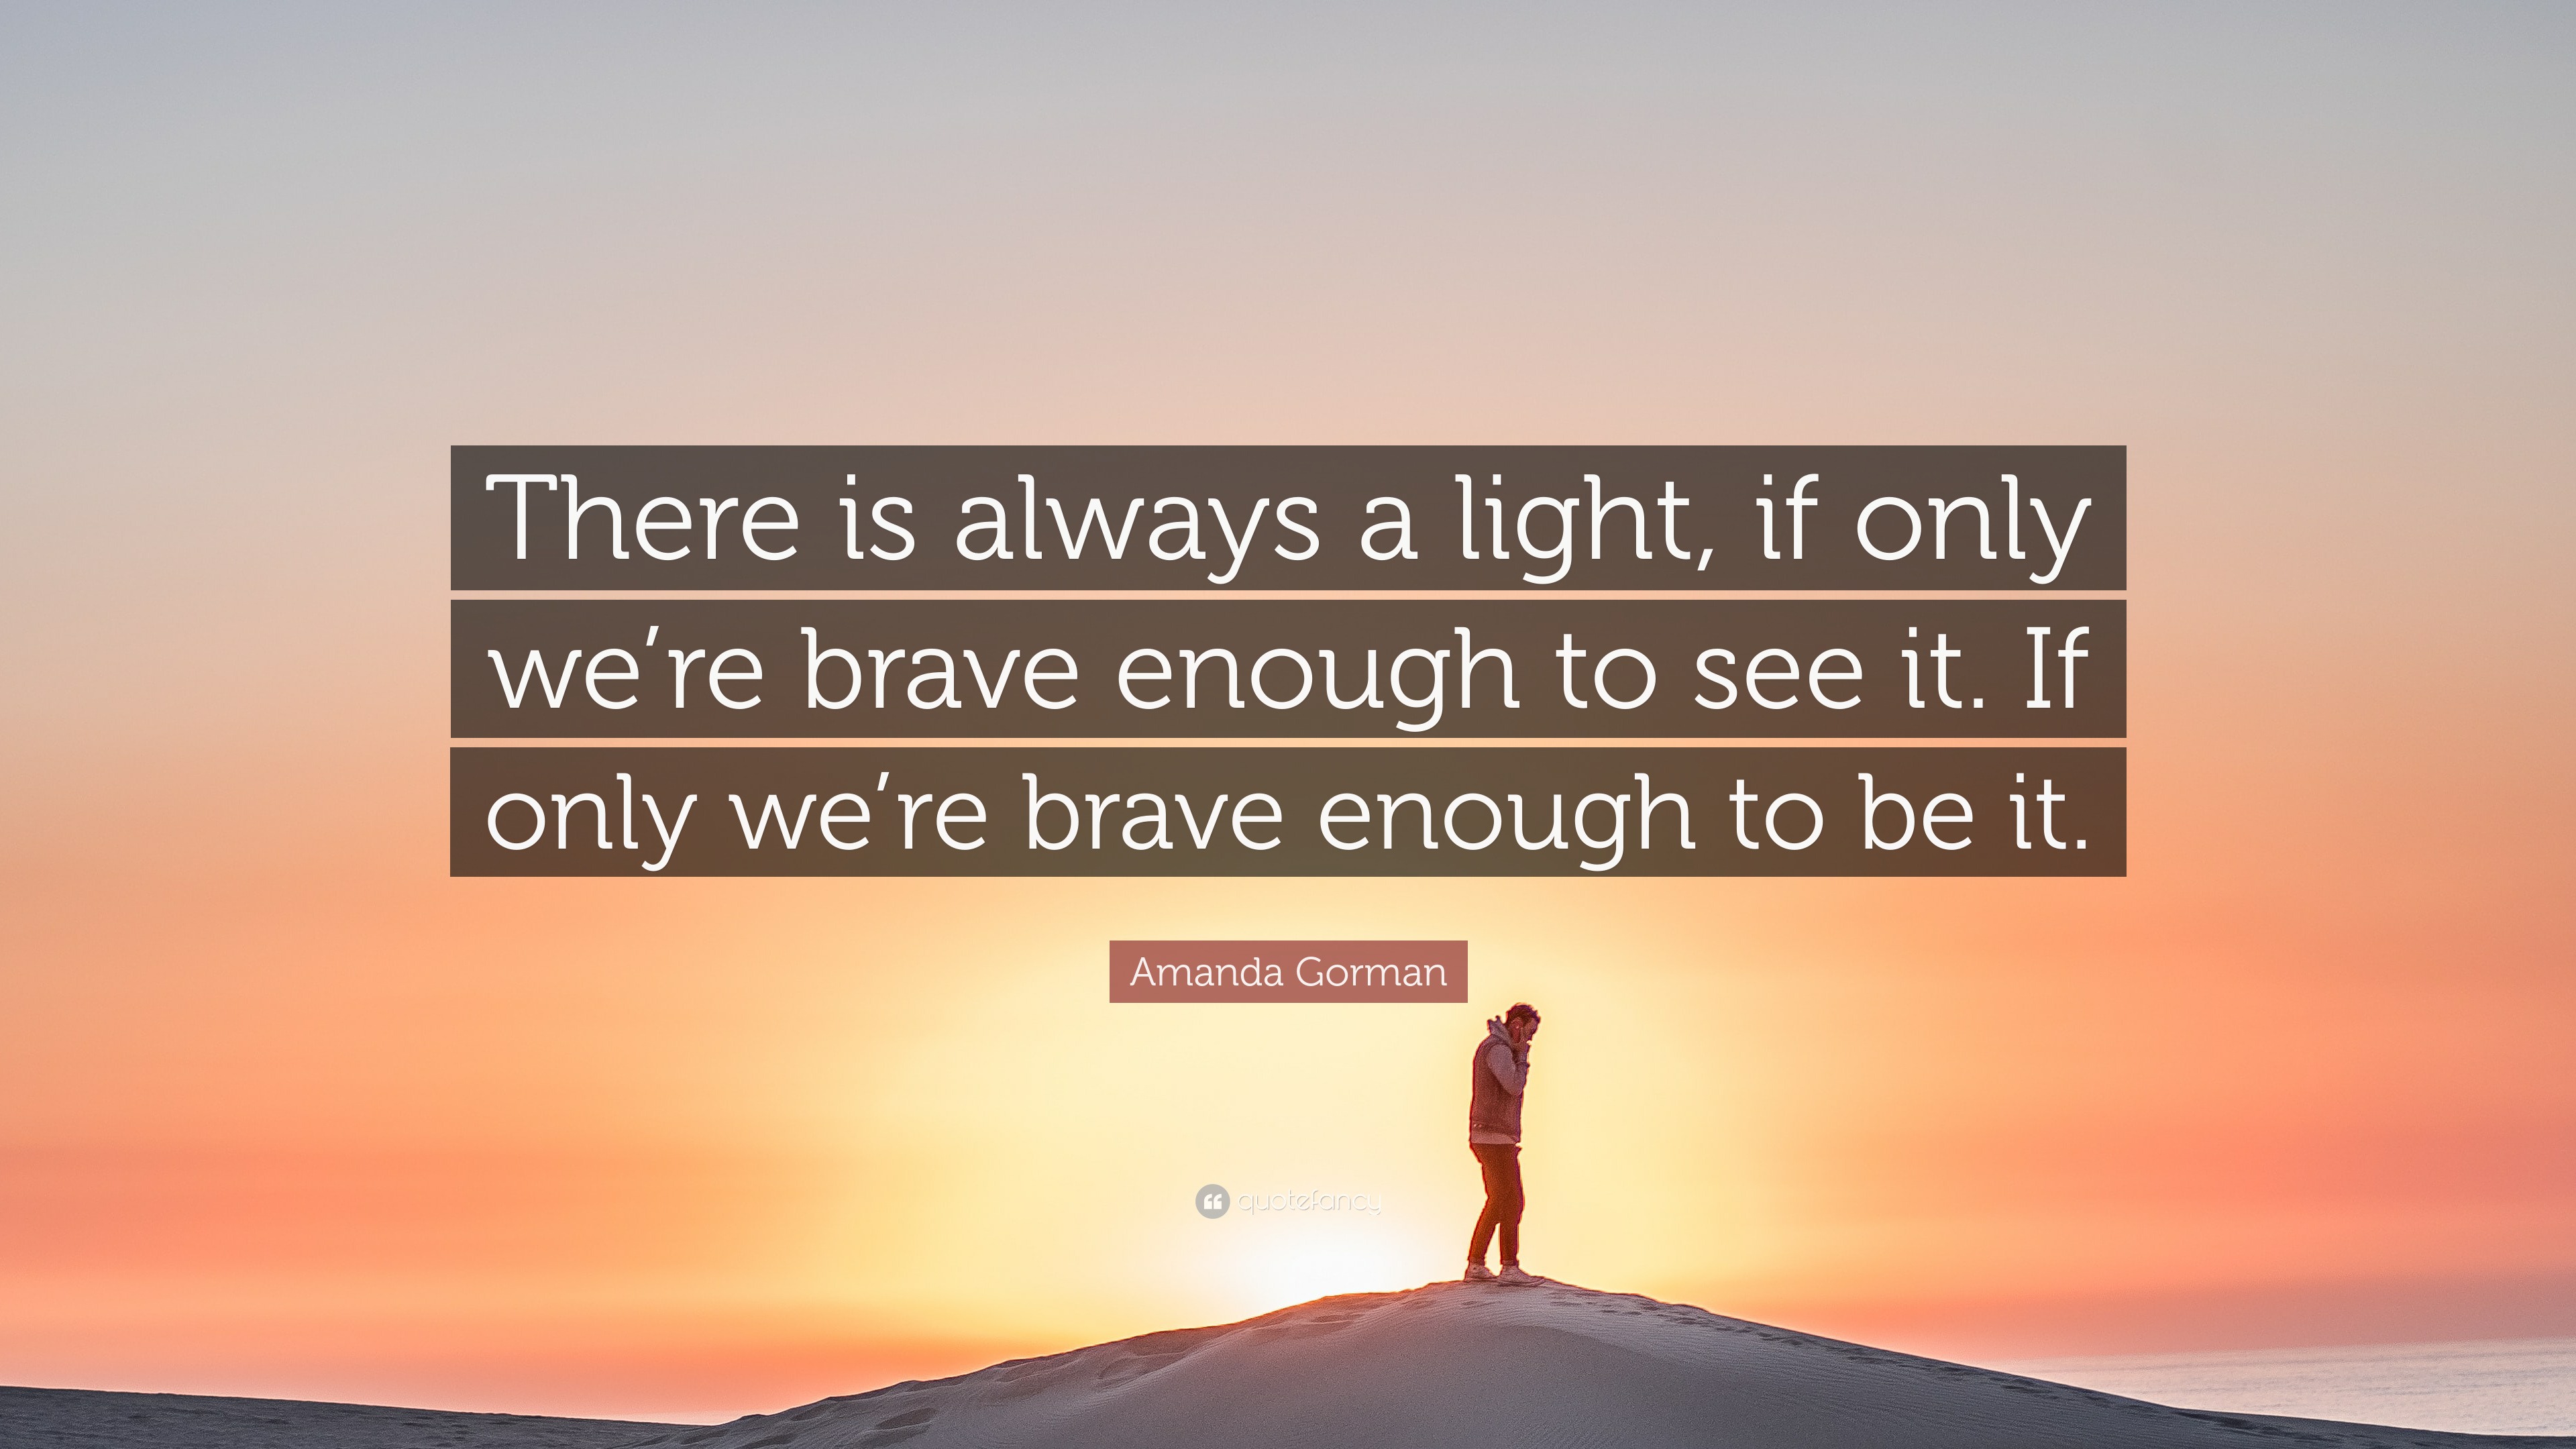 Amanda Gorman Quote: “There is always a light, if only we’re brave ...